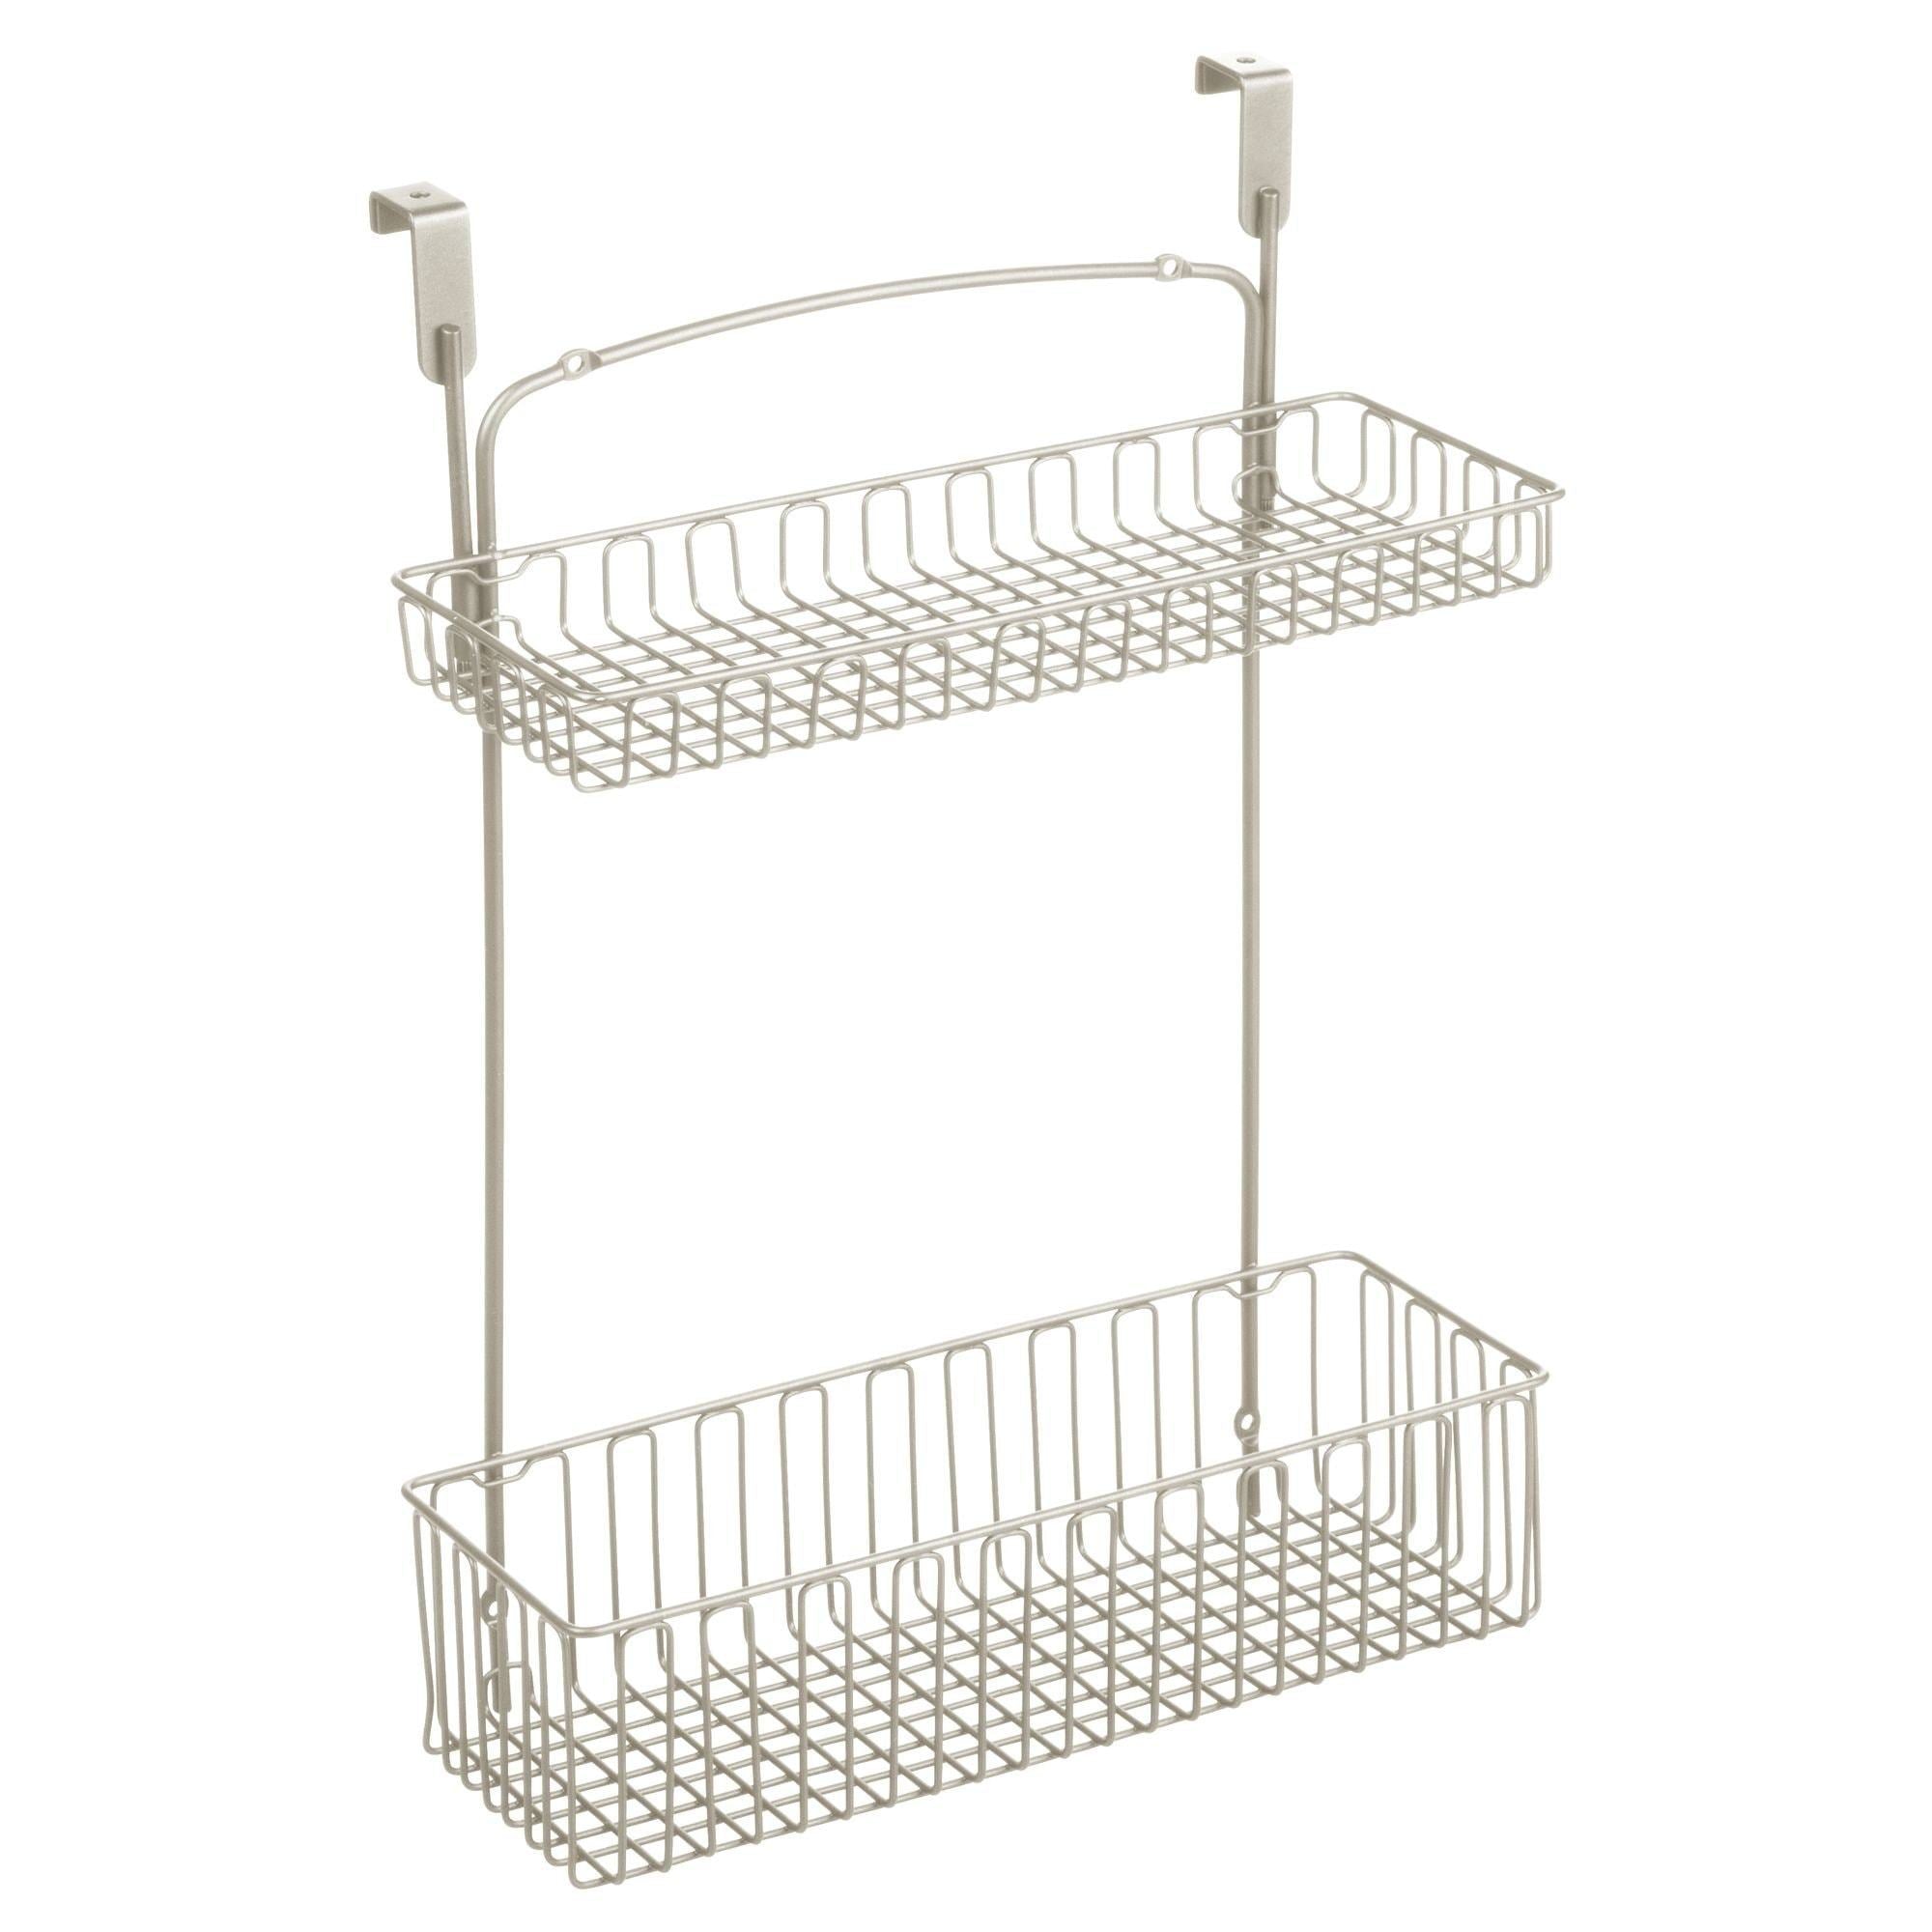 Online shopping mdesign metal farmhouse over cabinet kitchen storage organizer holder or basket hang over cabinet doors in kitchen pantry holds dish soap window cleaner sponges satin